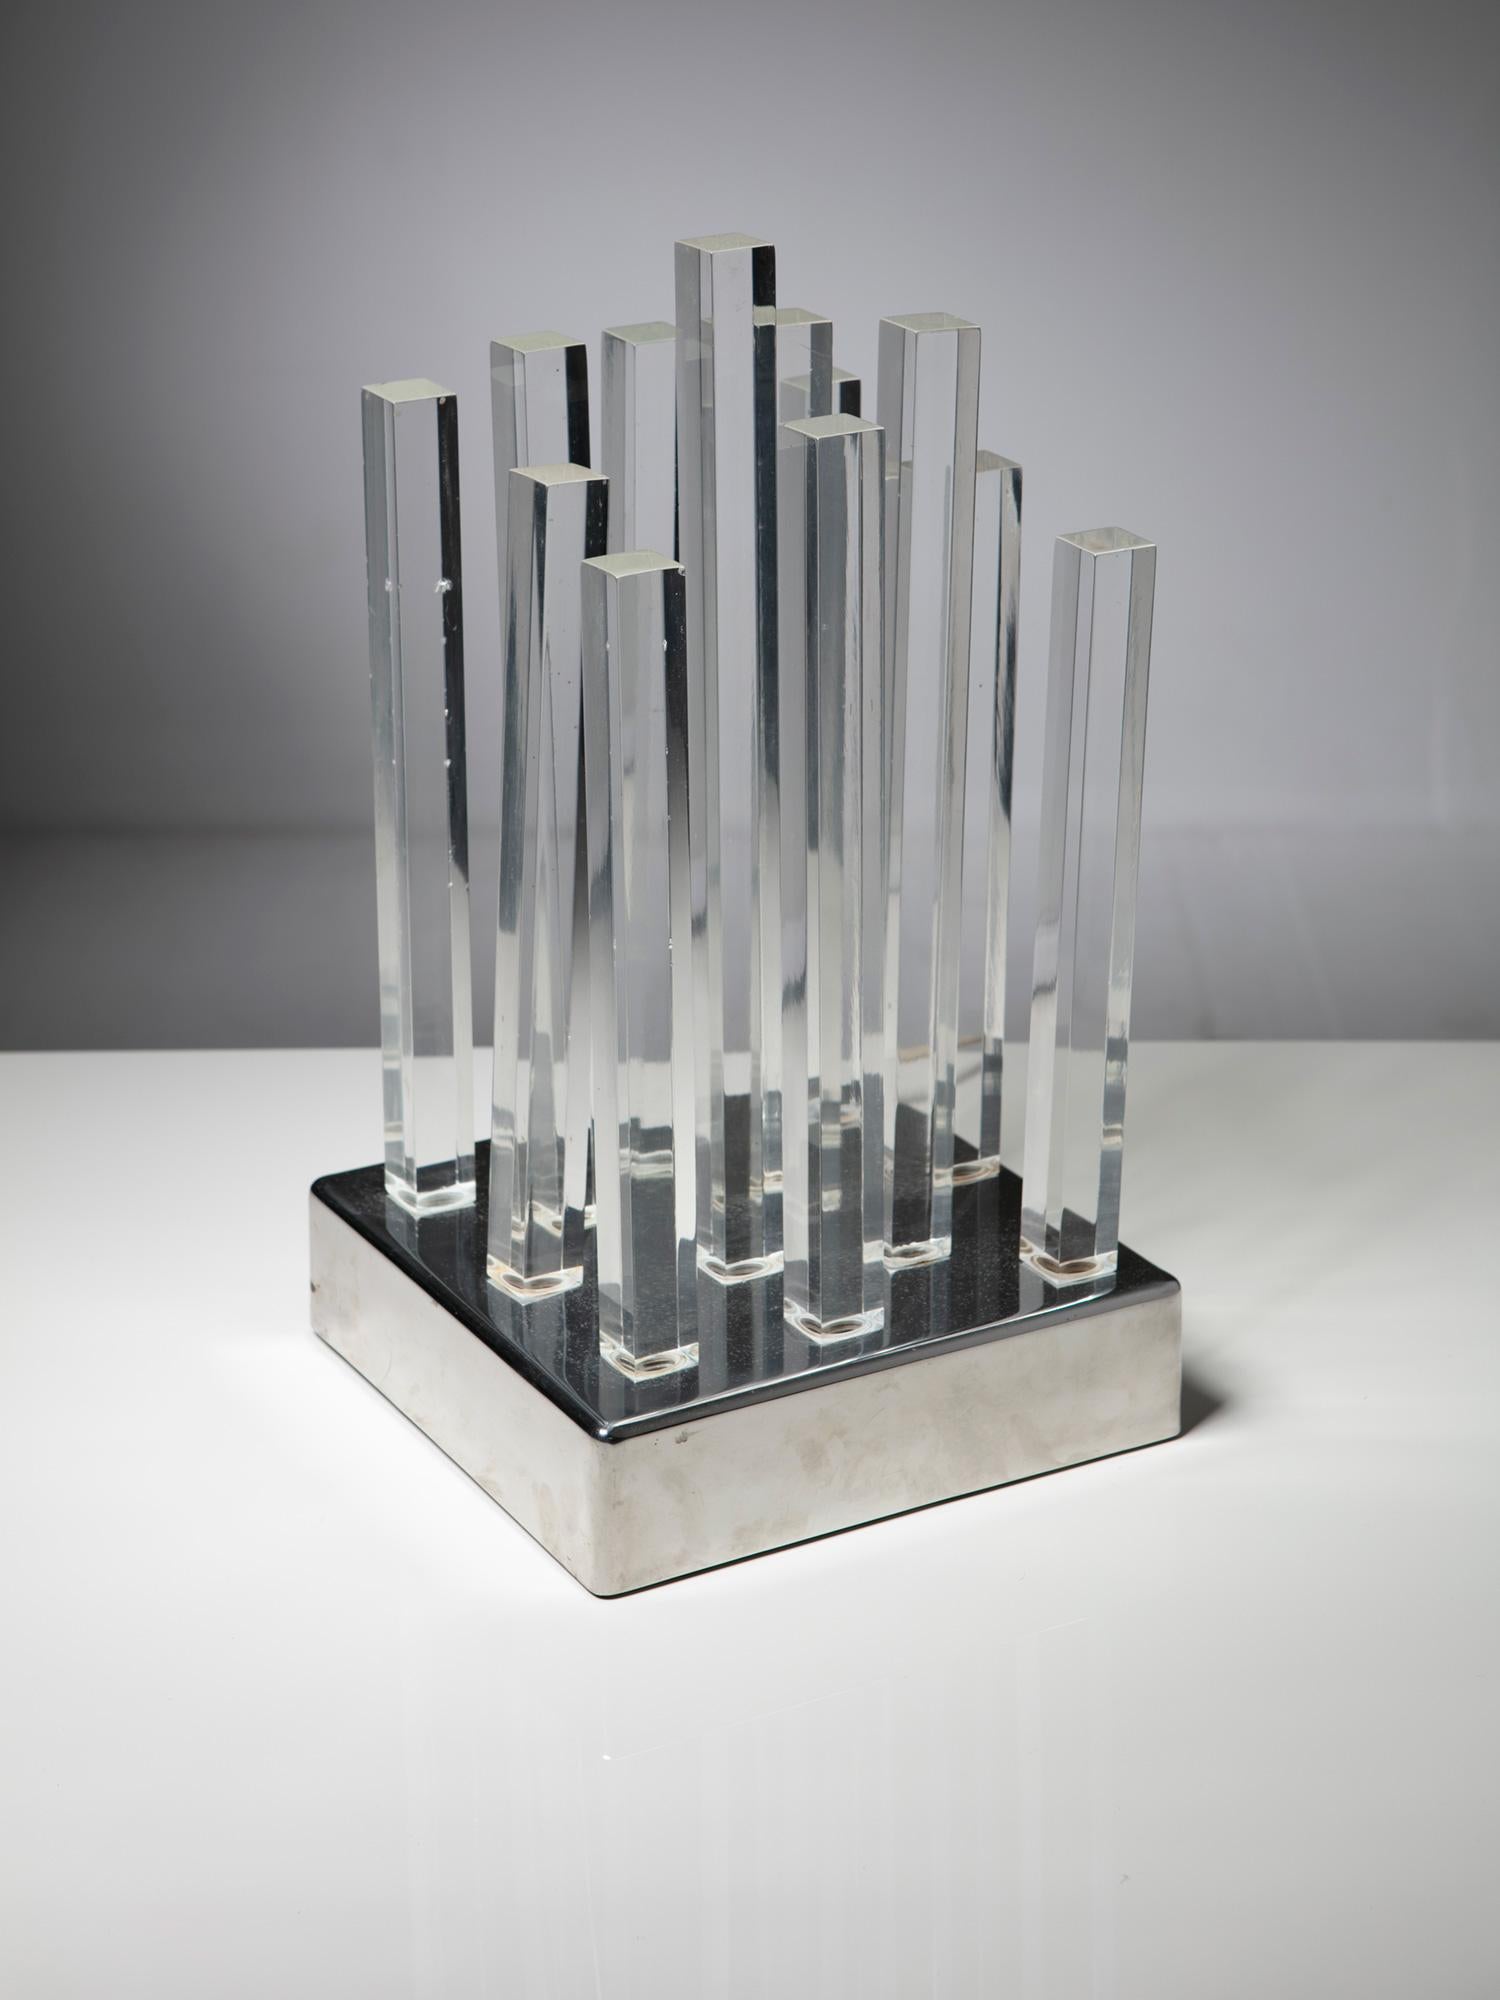 Rare table lamp manufactured by Cidue.
Large steel base supports 12 solid plexiglass blocks, transmitting the light from the bottom till the top of them.
This piece is part of the adventurous research made in Italian lighting design in the late